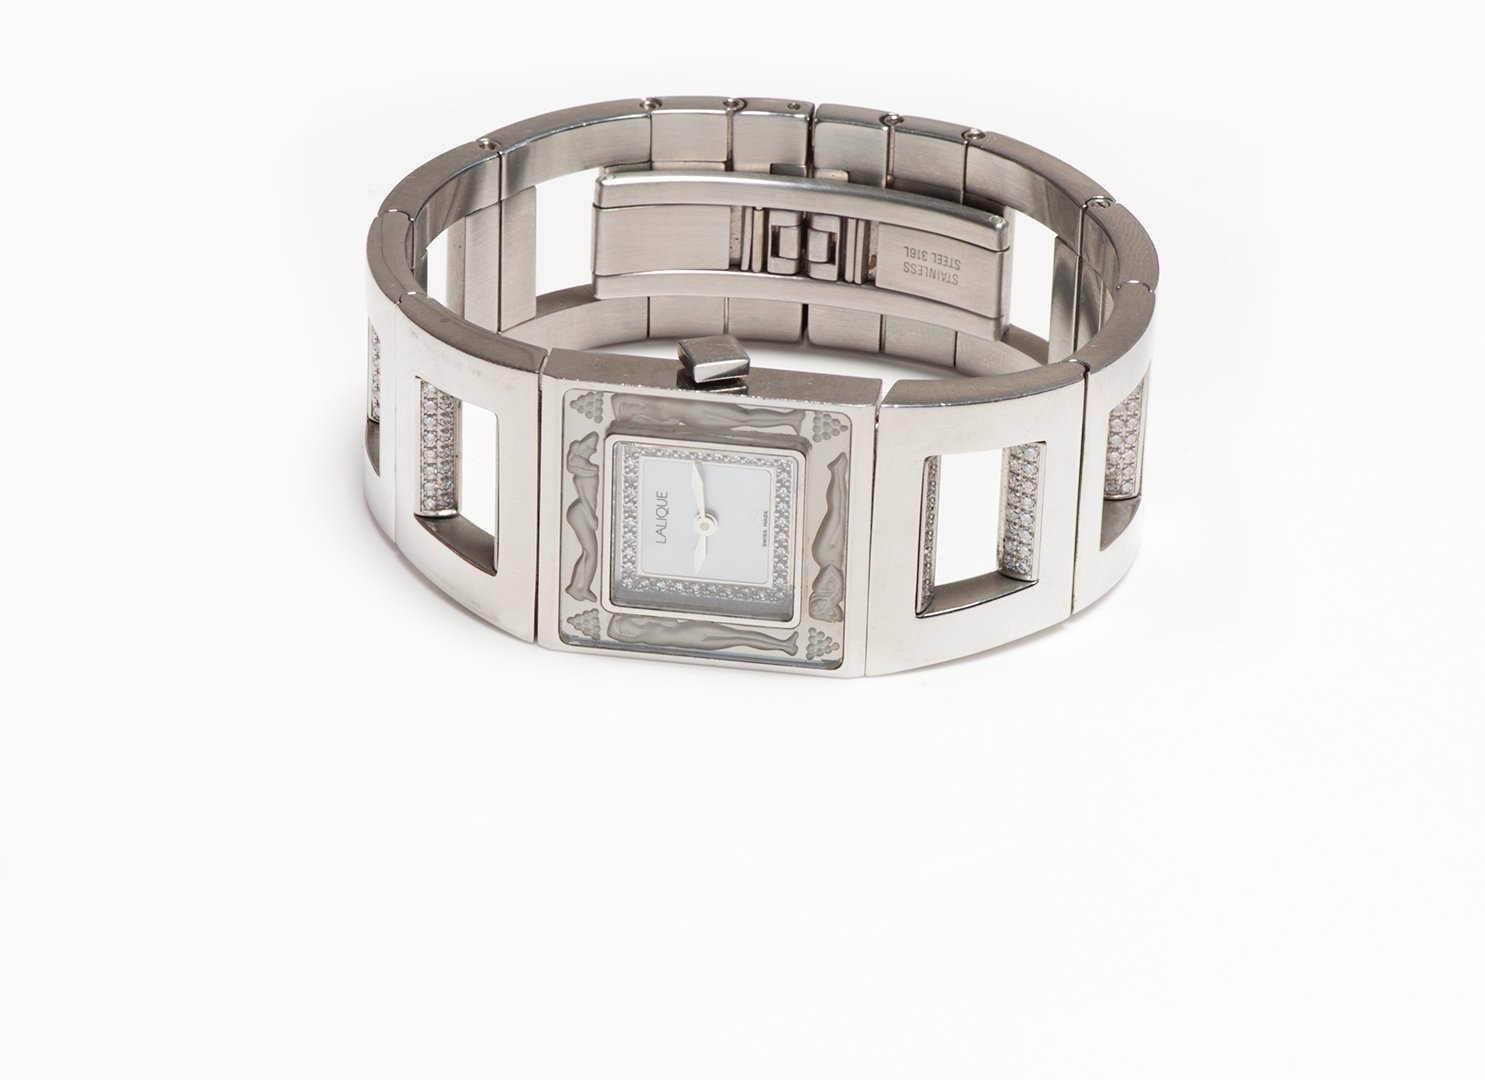 Lalique Bacchantes Crystal Diamond Stainless Steel Watch